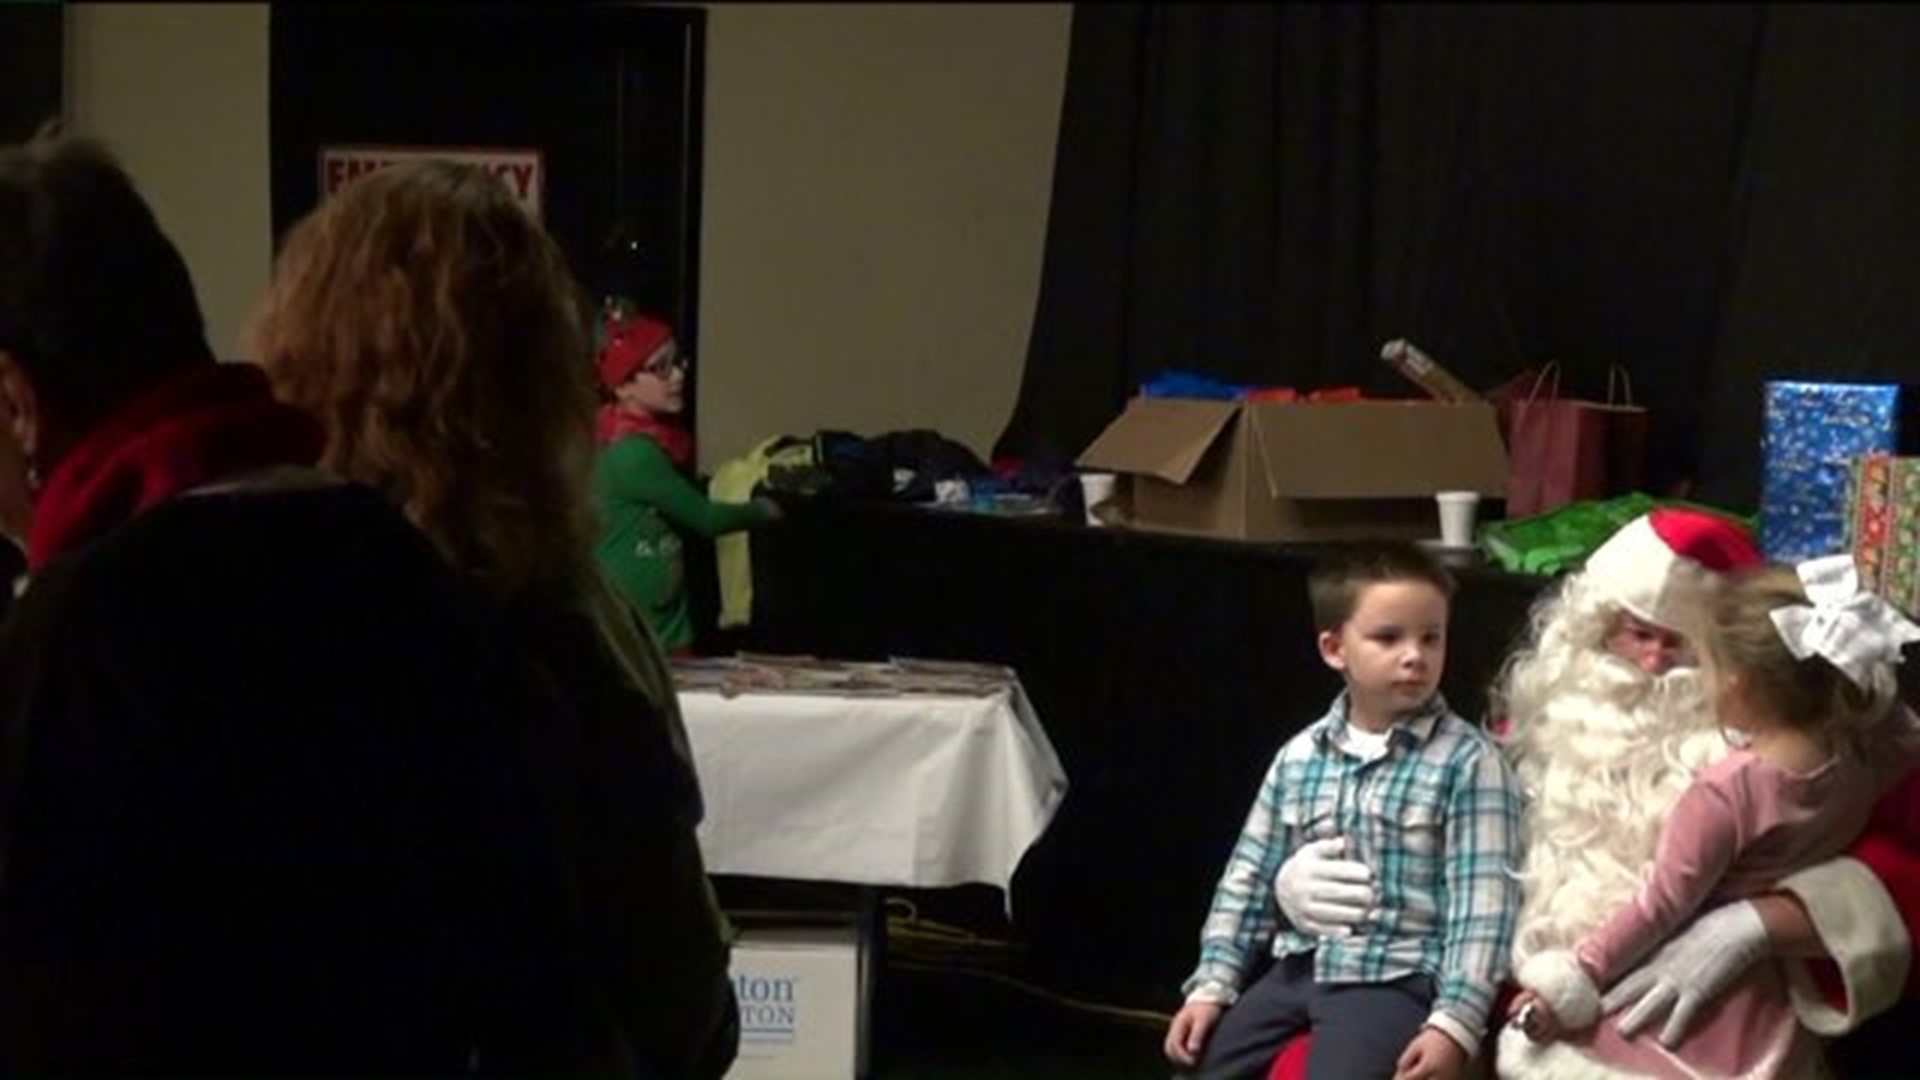 A Visit from St. Nick in Luzerne County